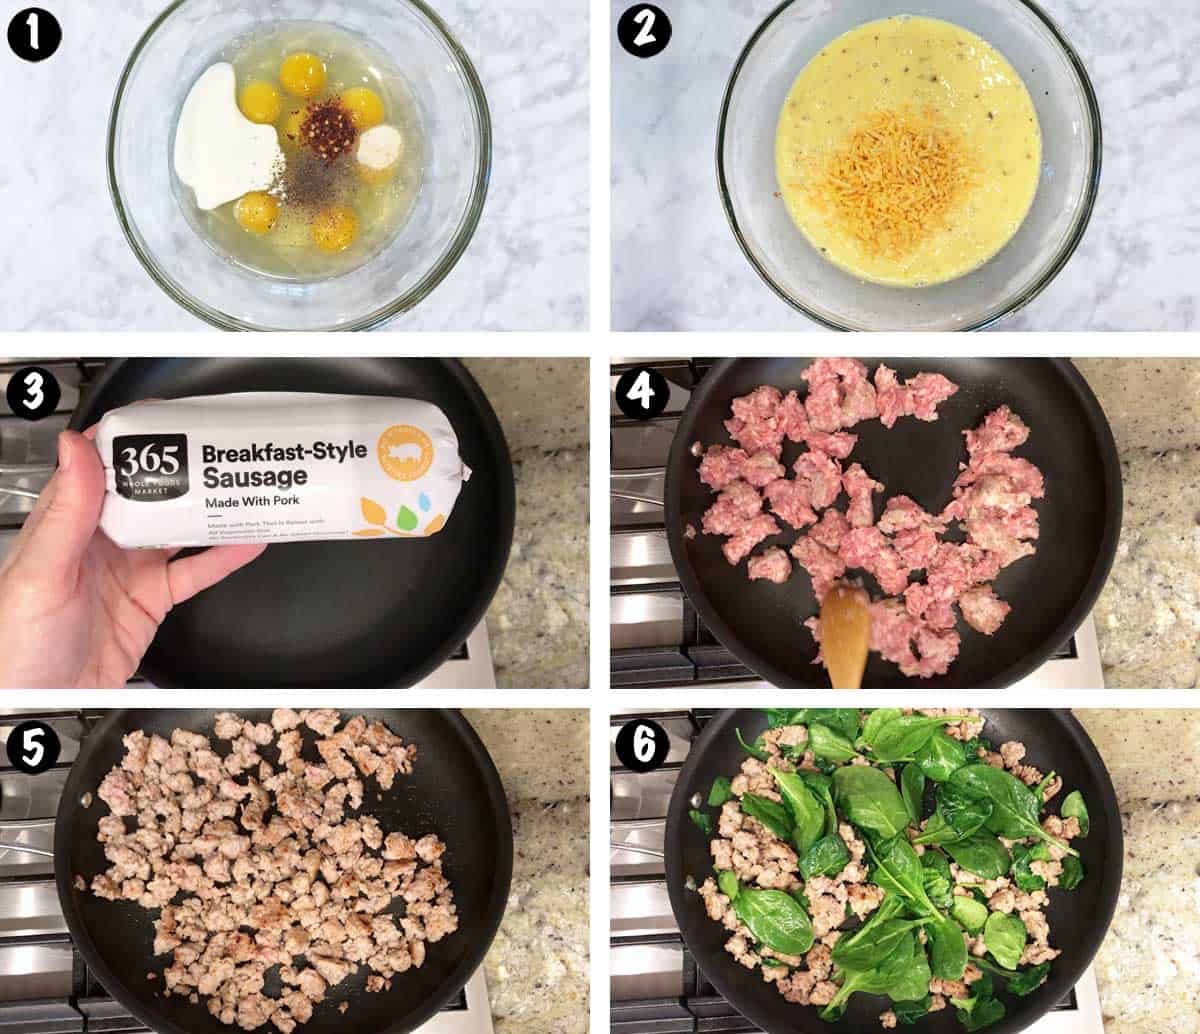 A photo collage showing the first six steps for making a sausage breakfast casserole.